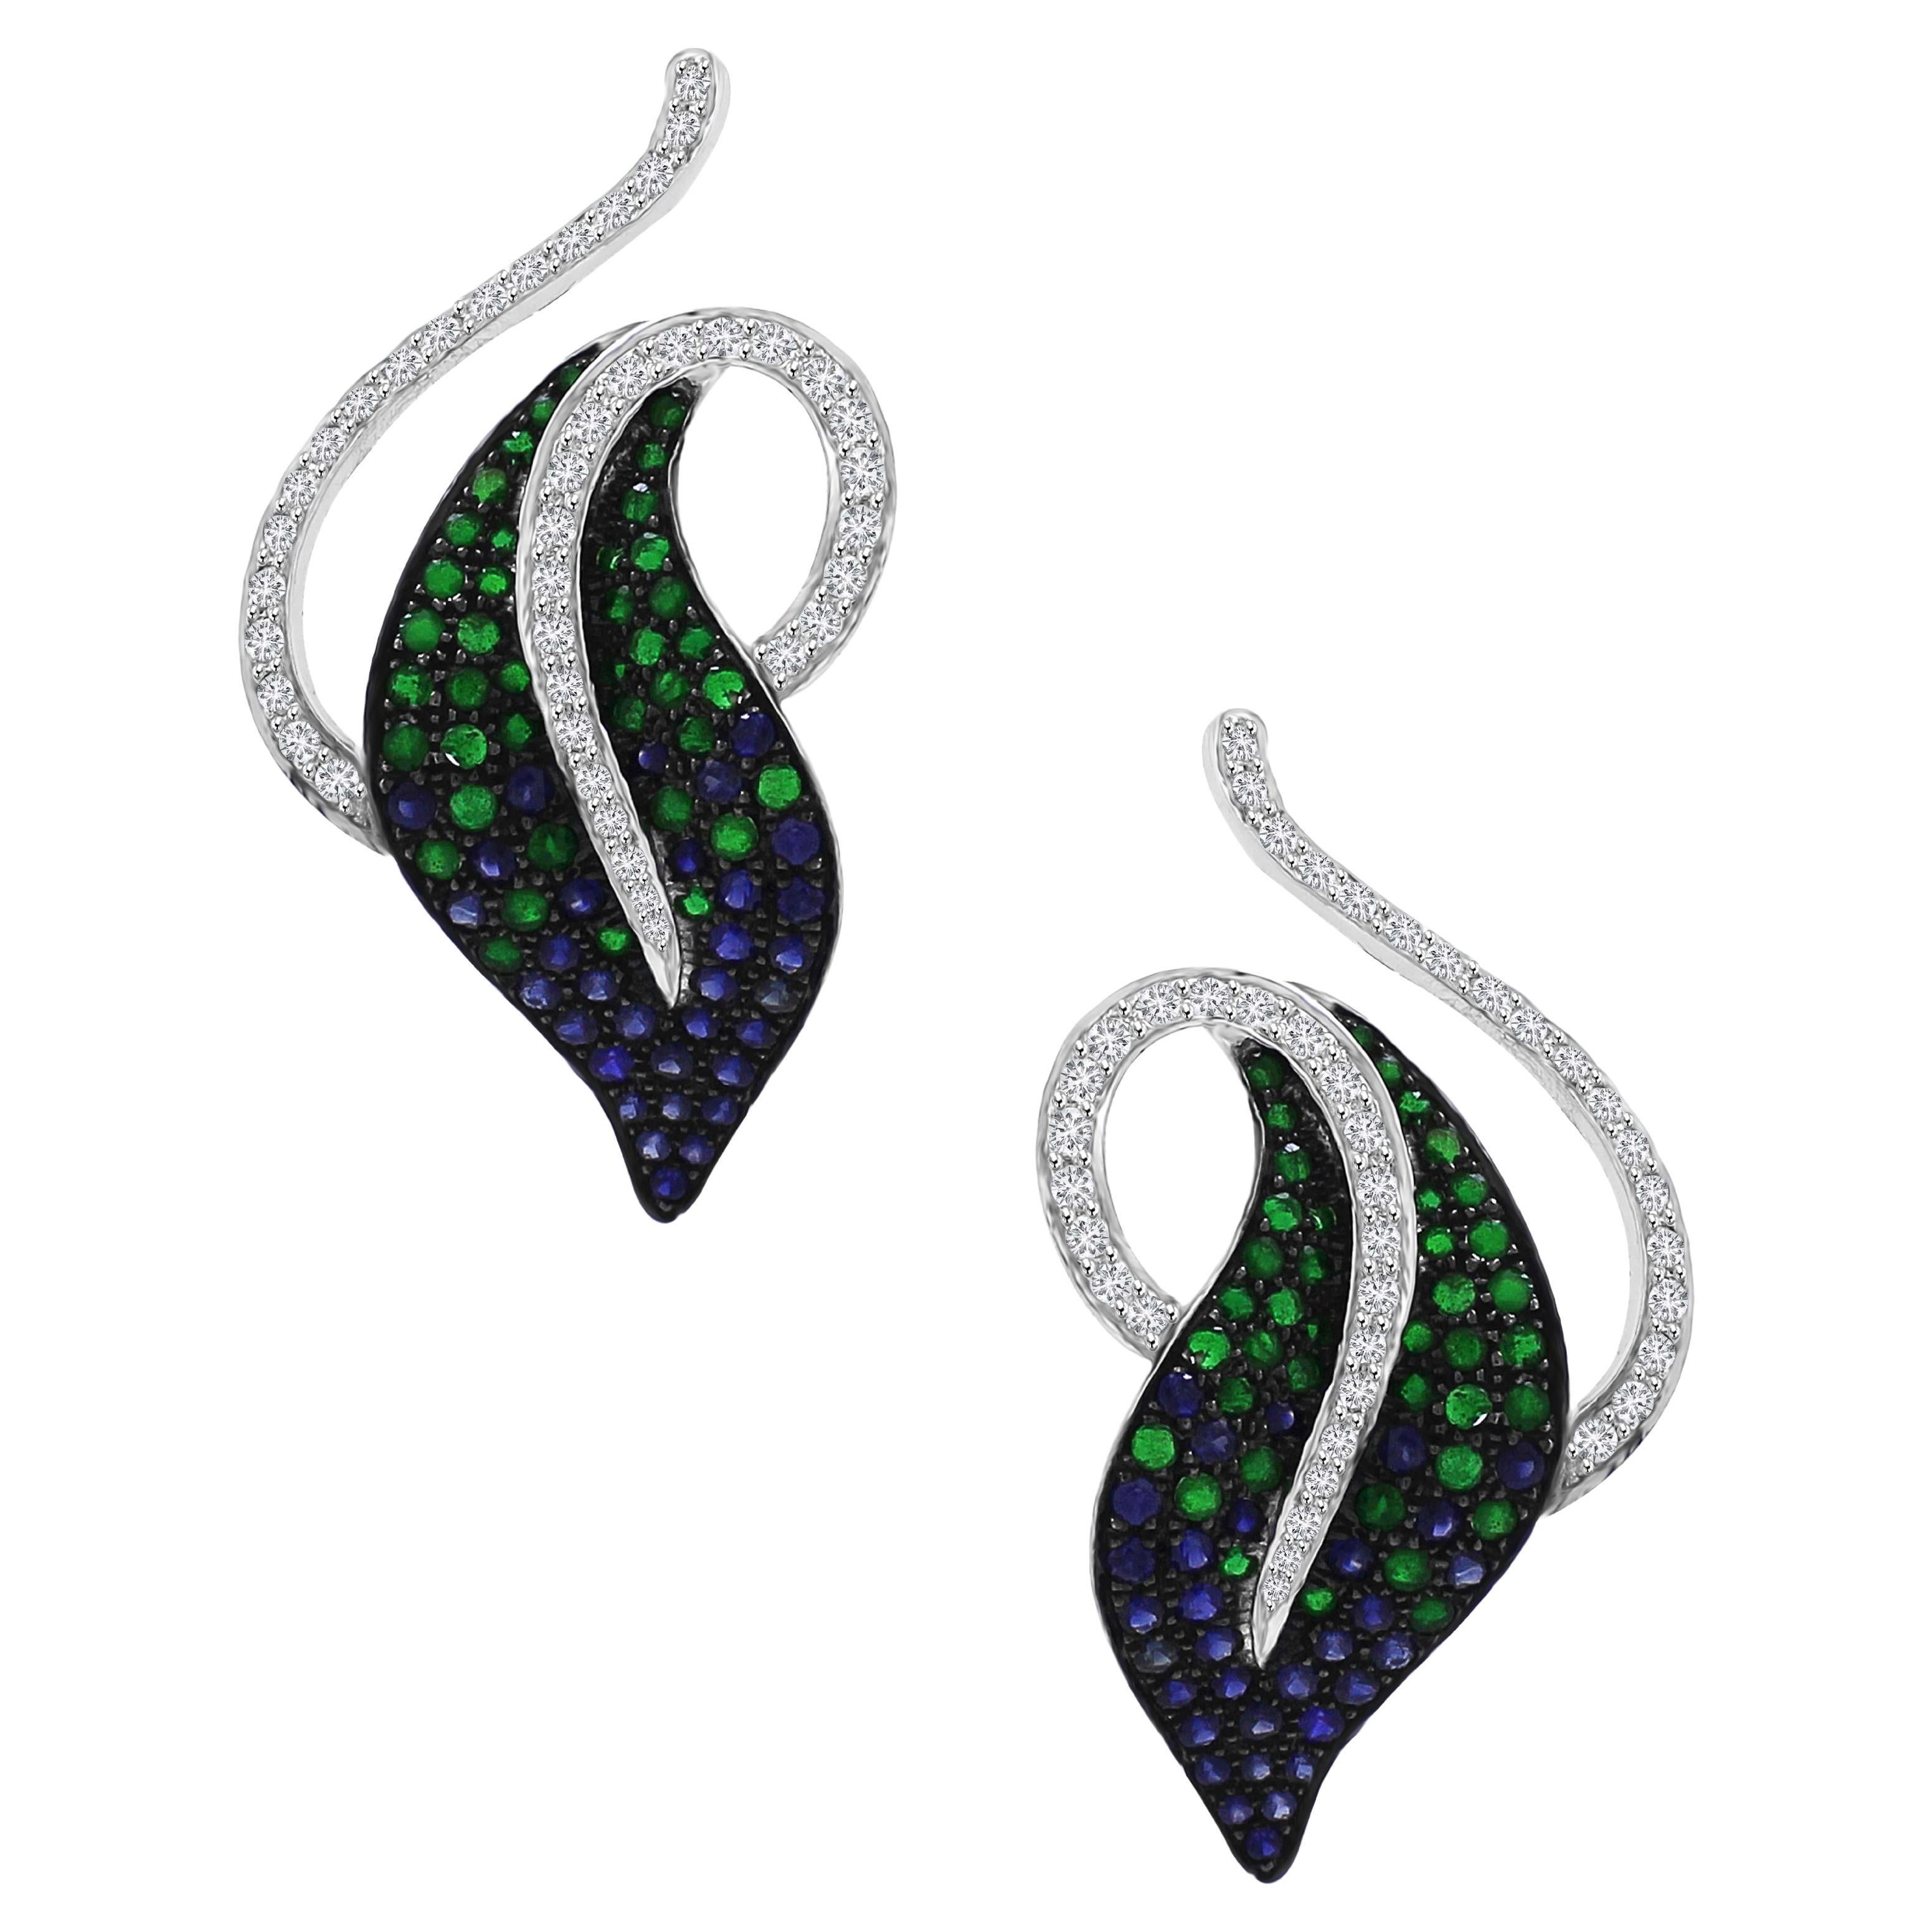 3.63 cts of Blue Sapphire and Tsavorite Leaf studs For Sale